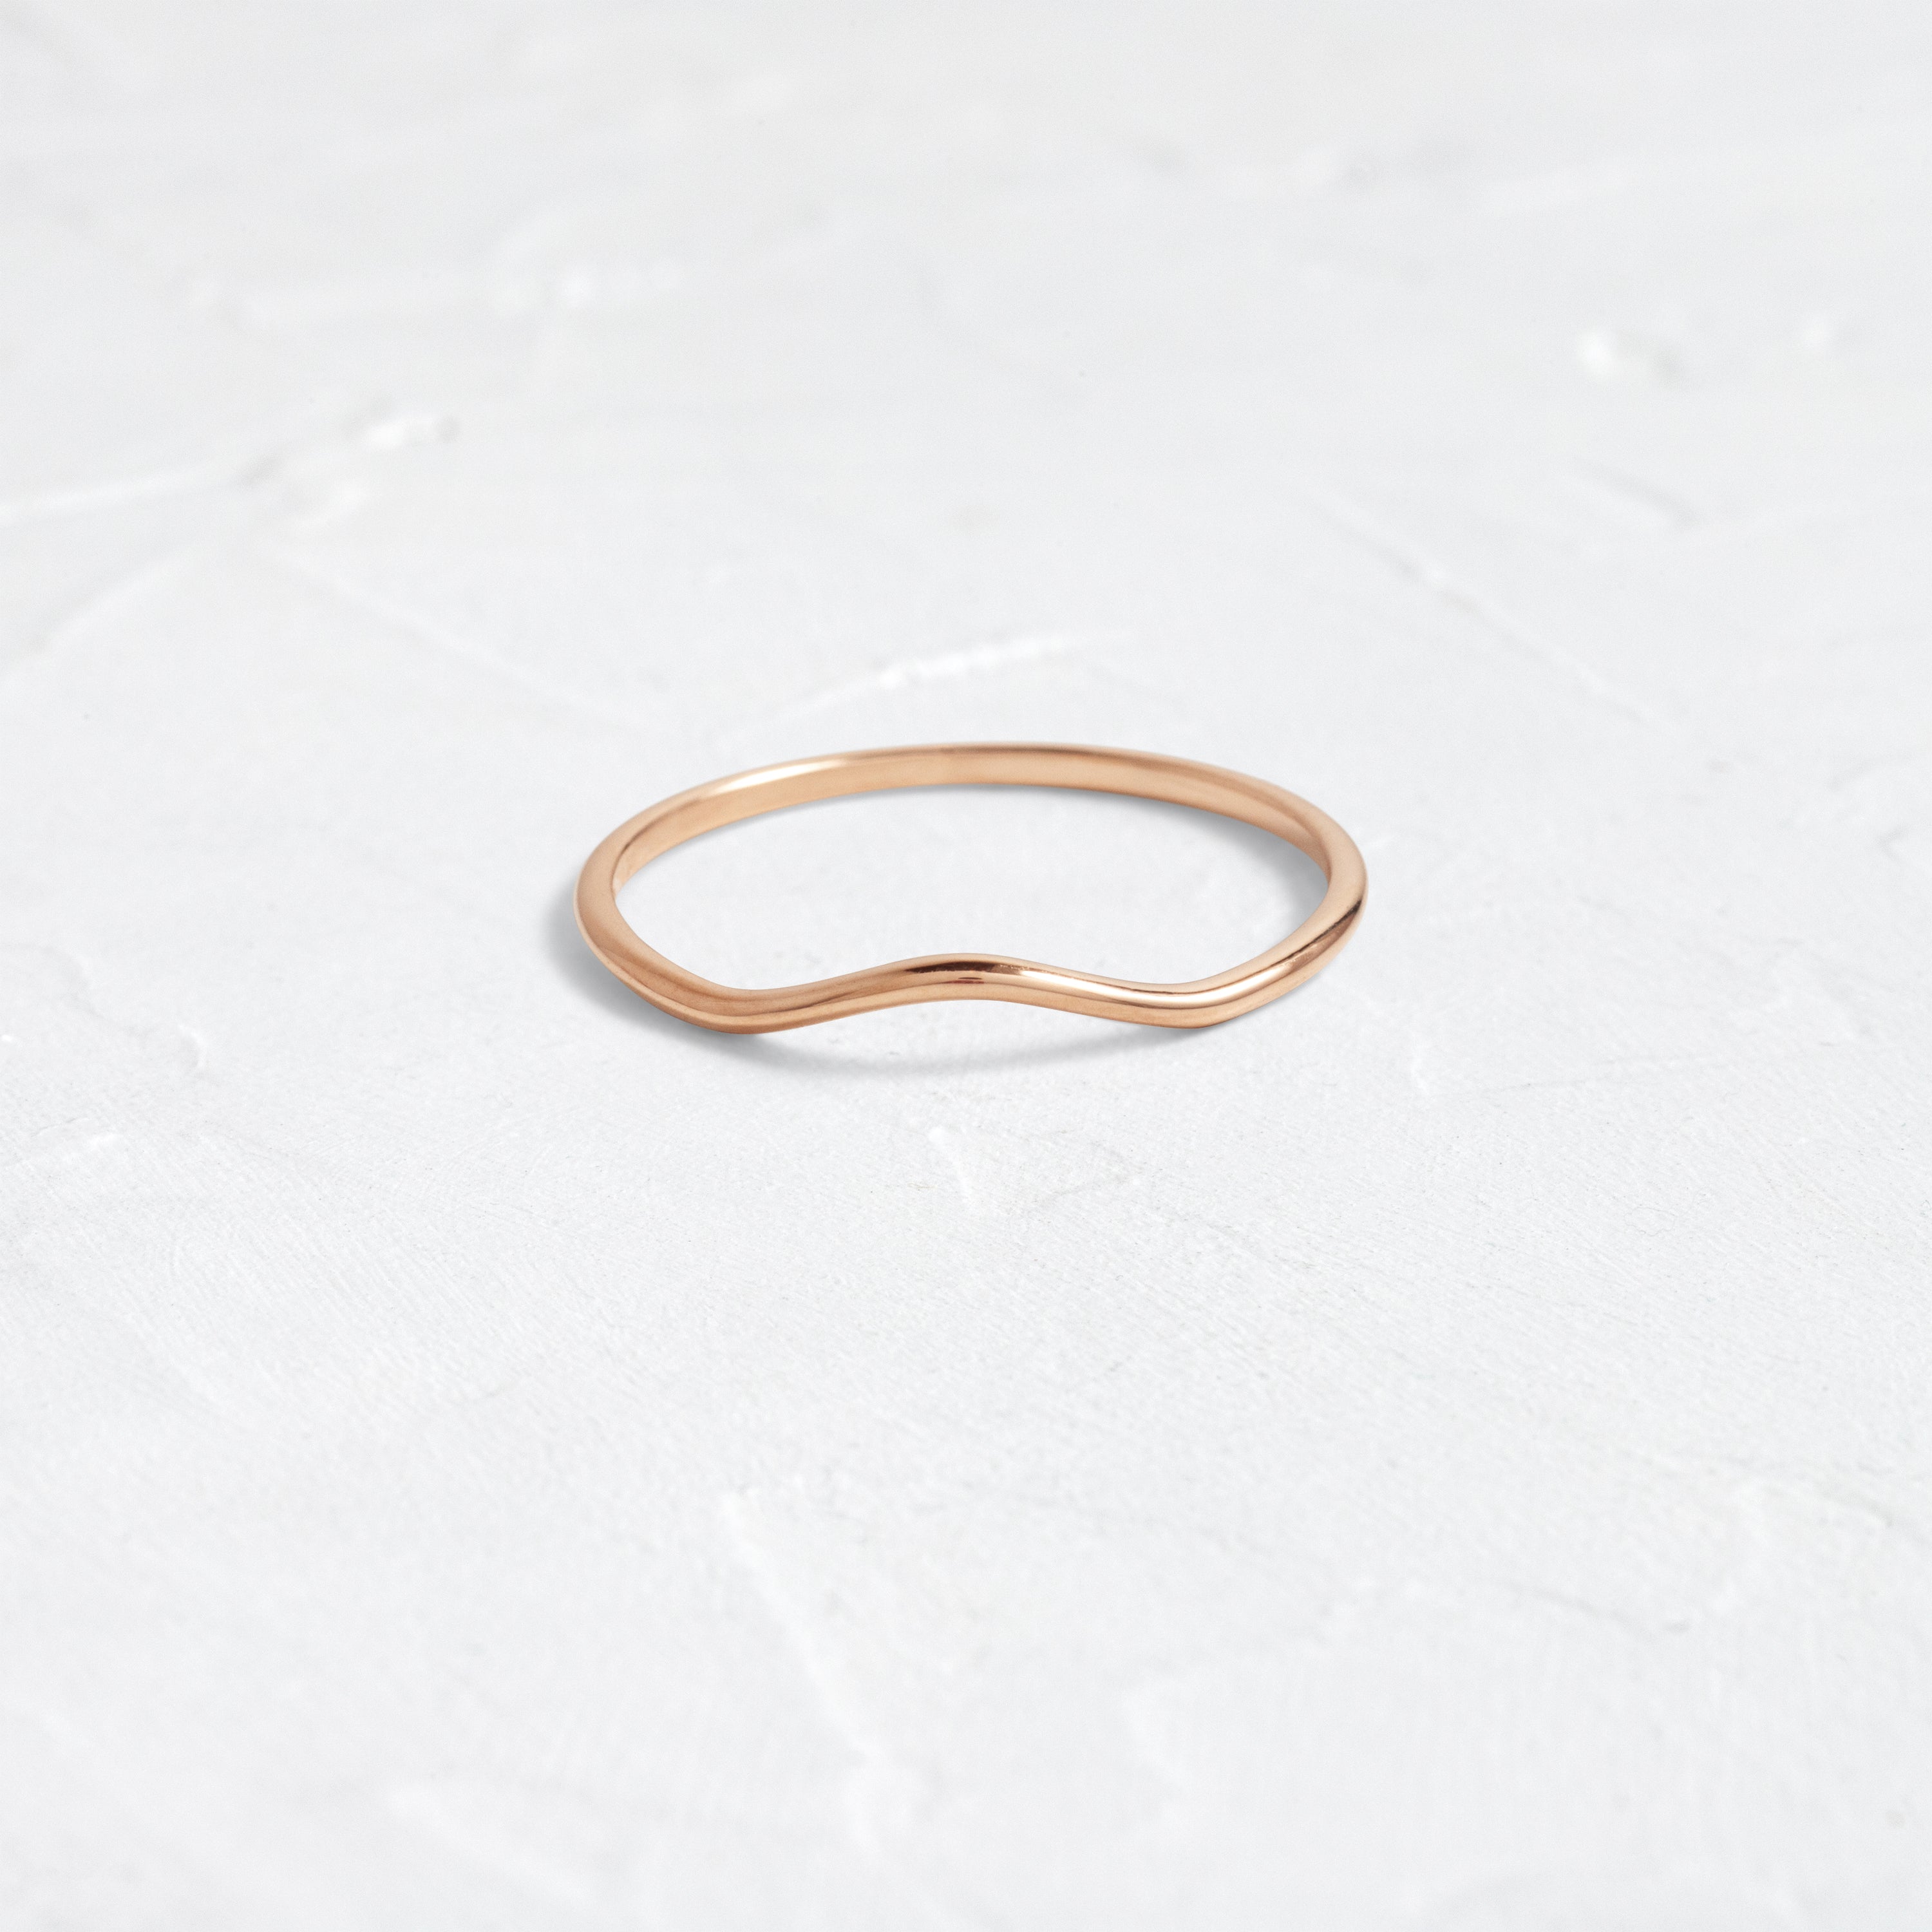 Small & Delicate 14k Rose Gold Womens Curved Wedding Band, V